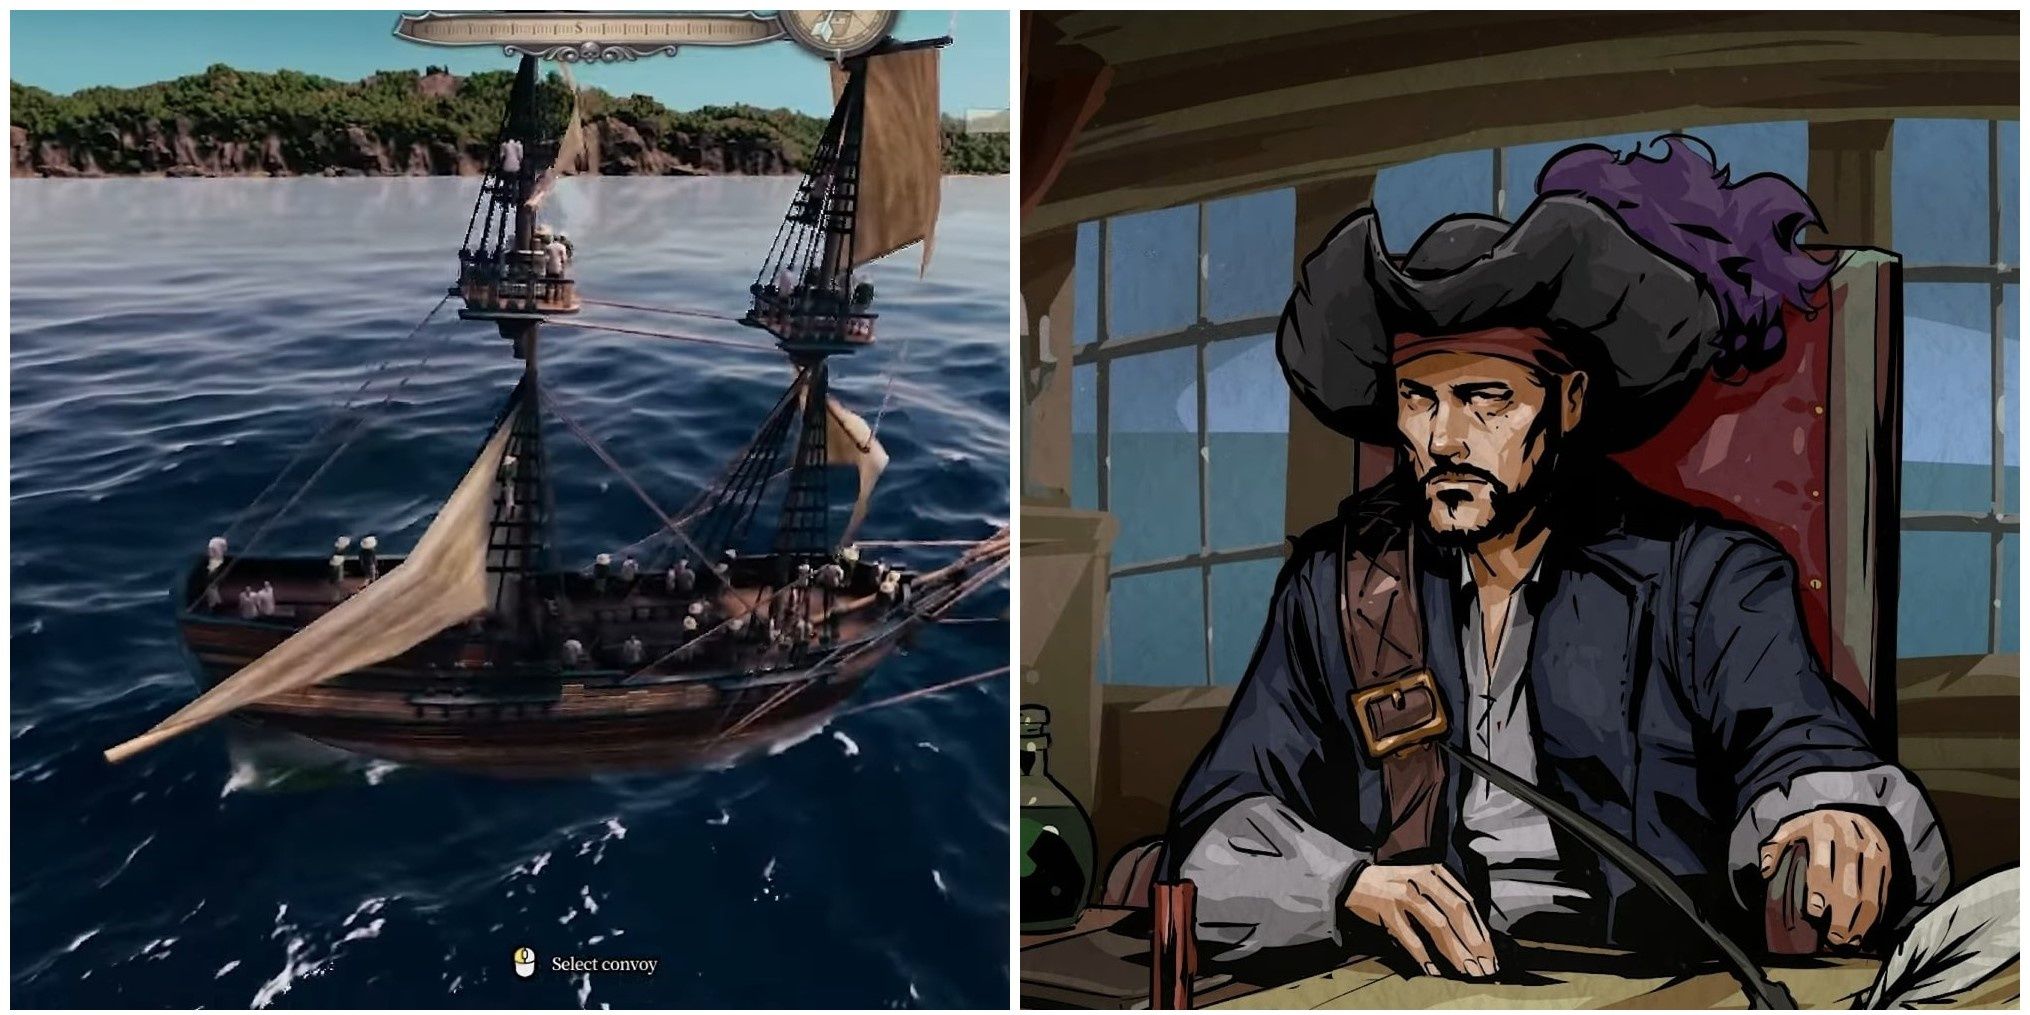 Pirate Strategies for Capturing a Ship